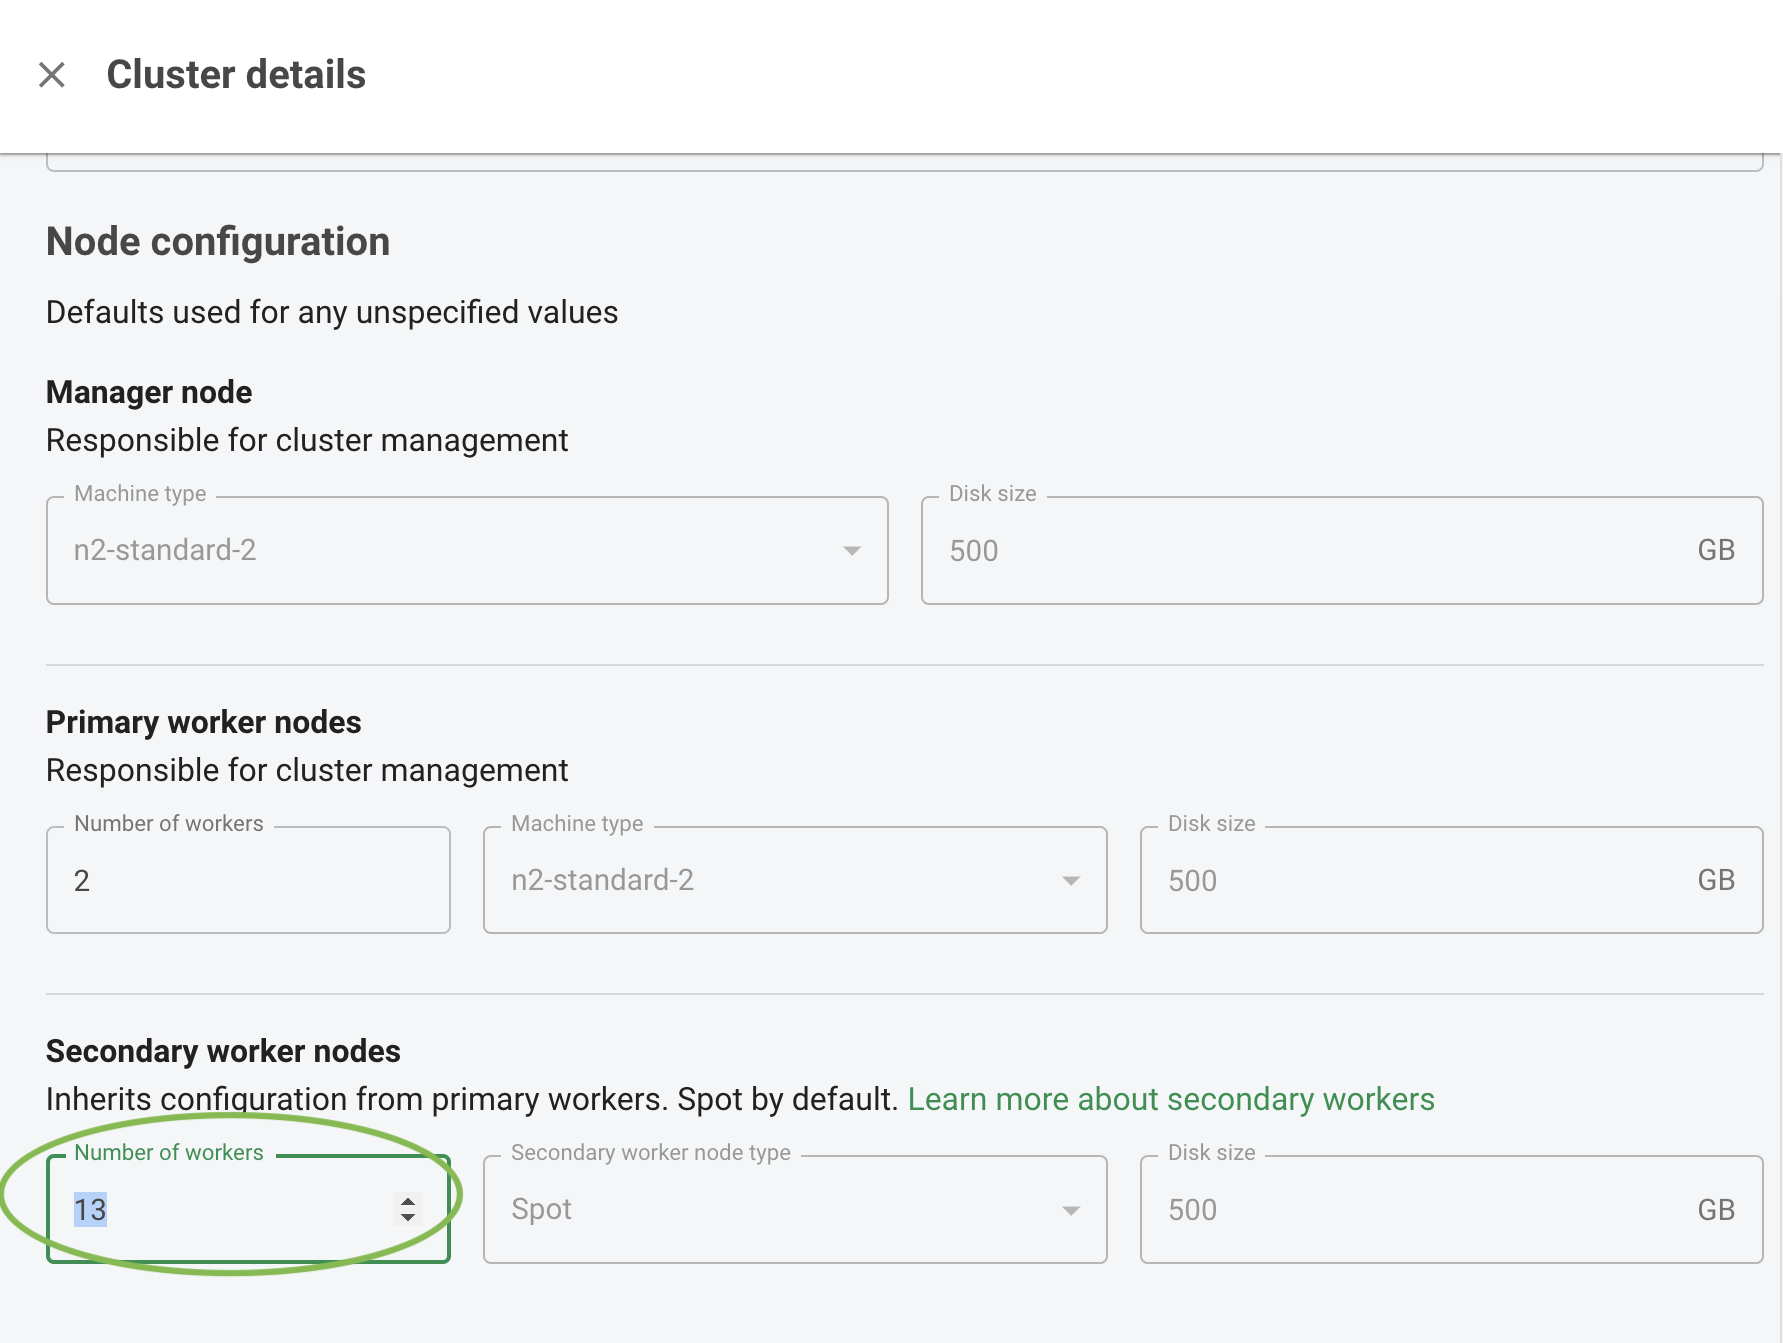 Screenshot of Node configuration section in Customize dialog, highlighting the configurable 'Number of workers' field in 'secondary worker nodes' subsection.